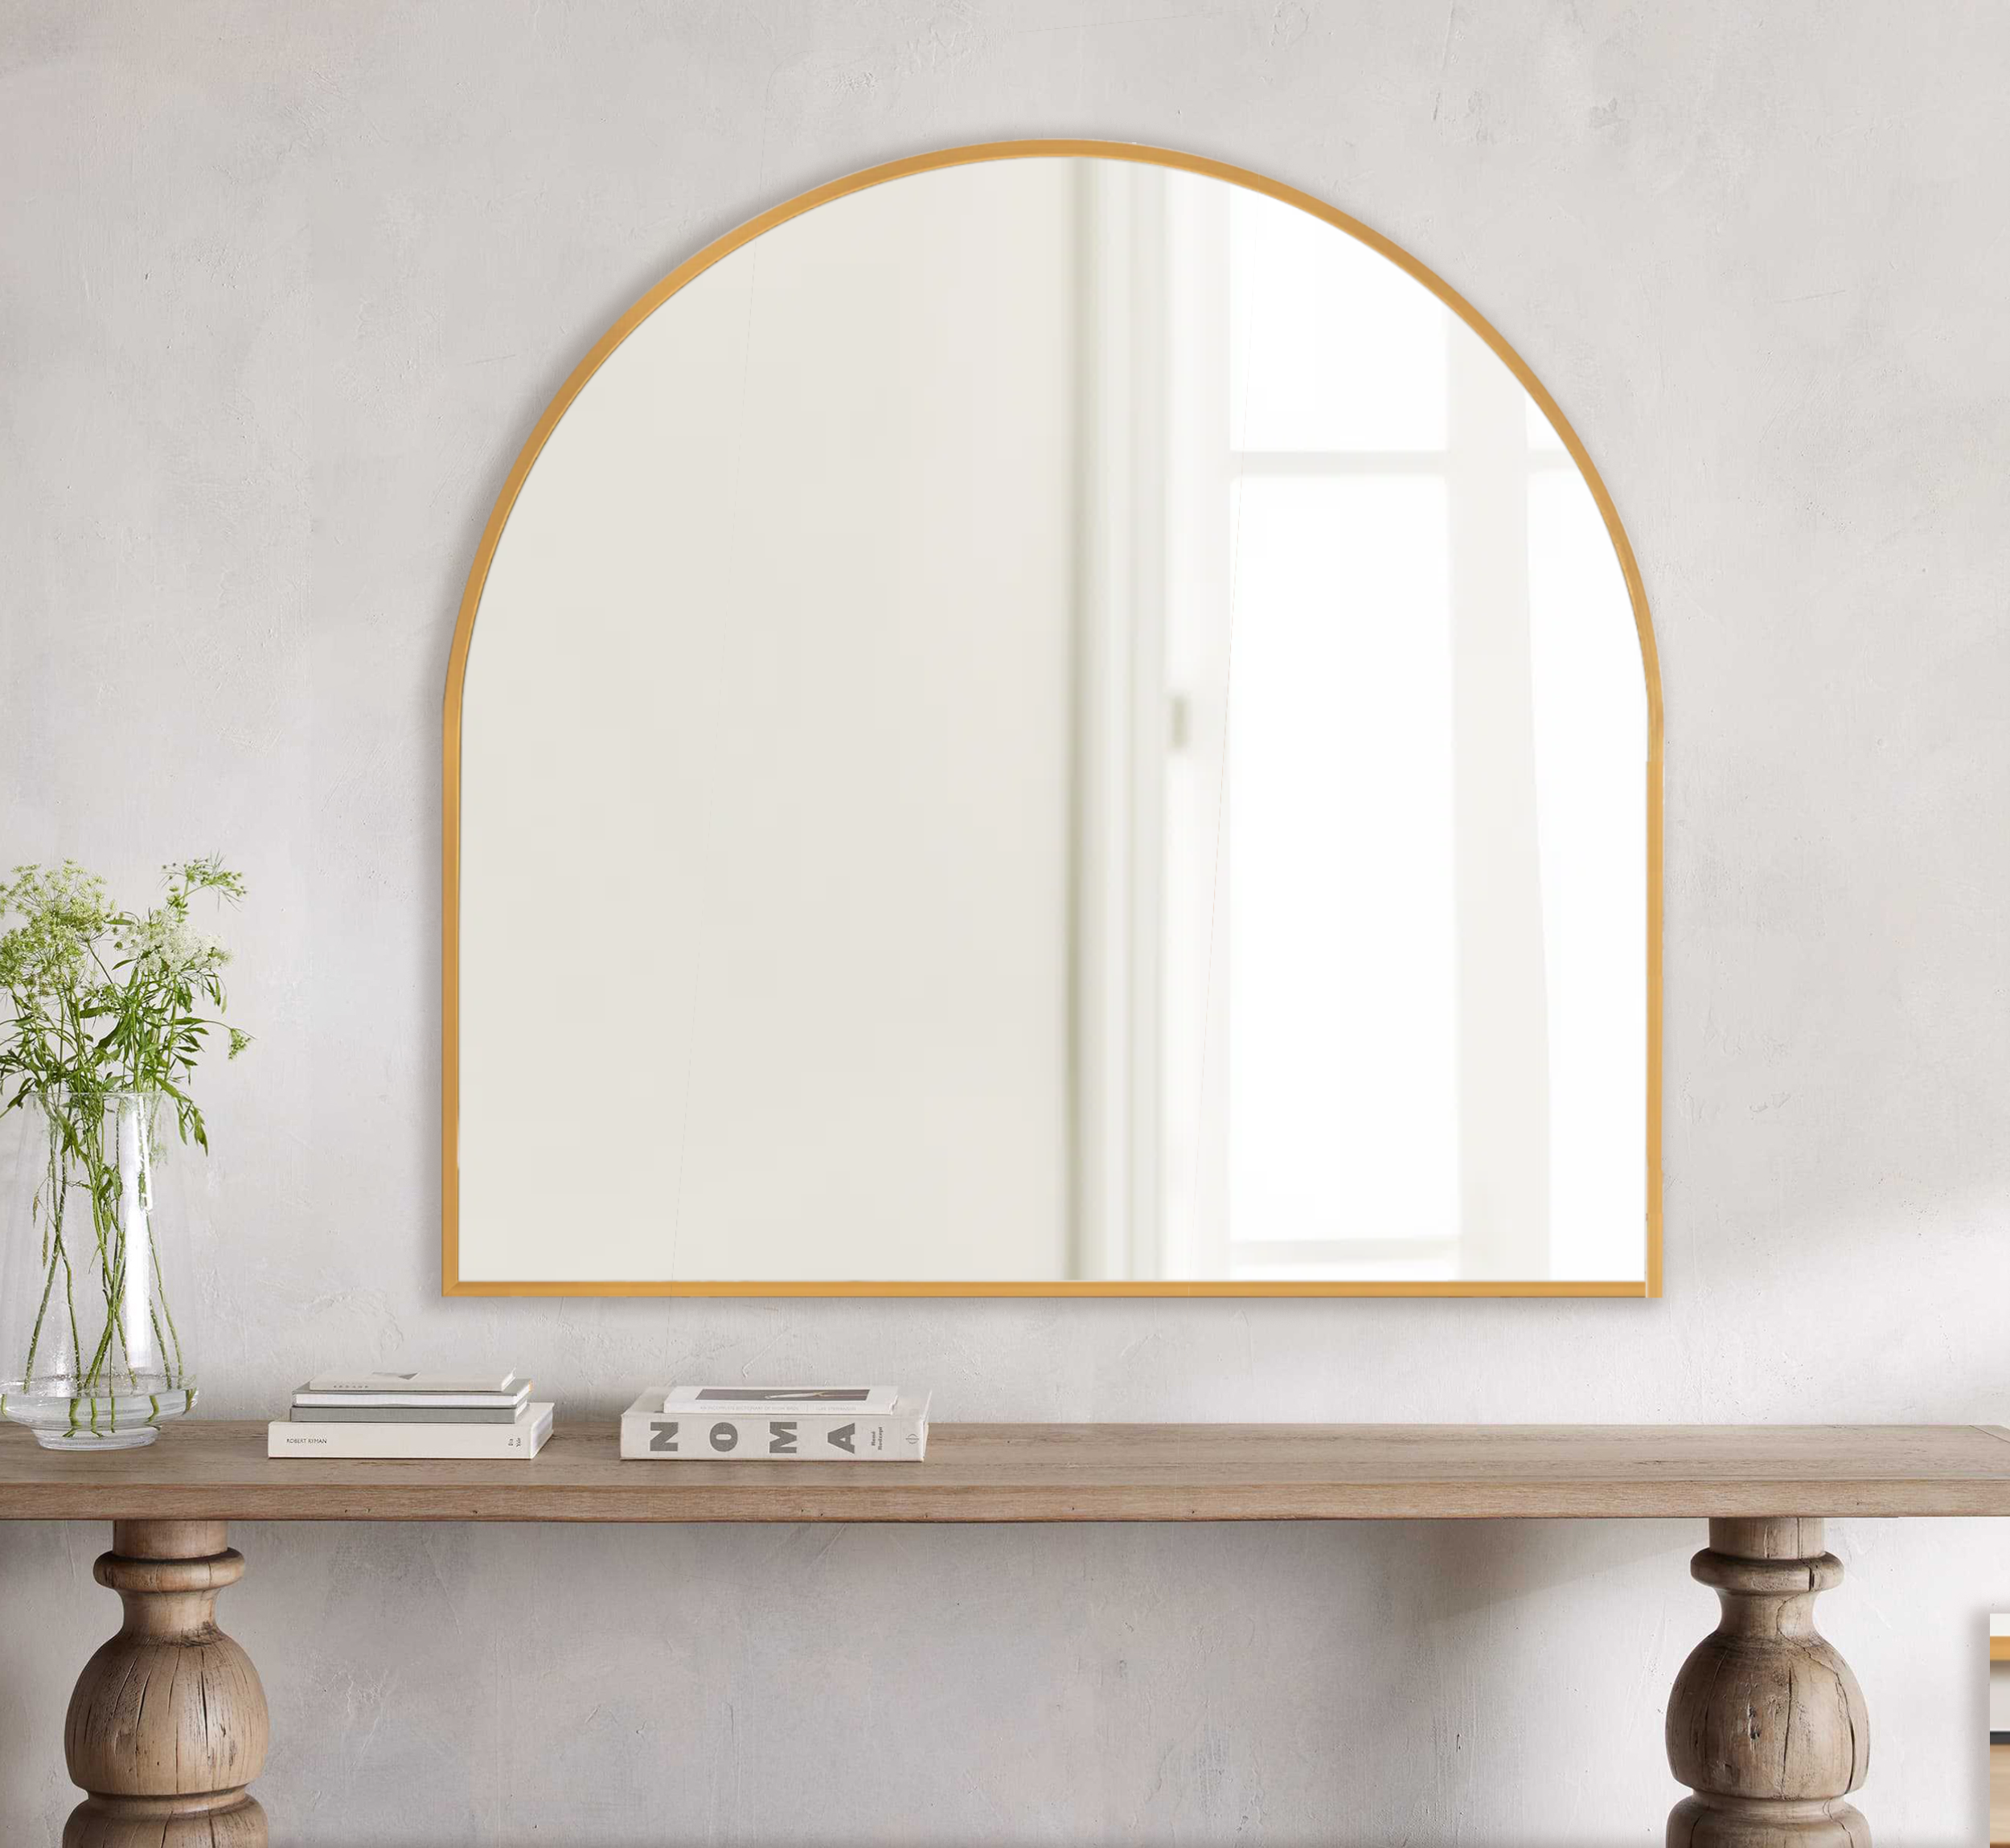 Arched Metal Wall Mirror